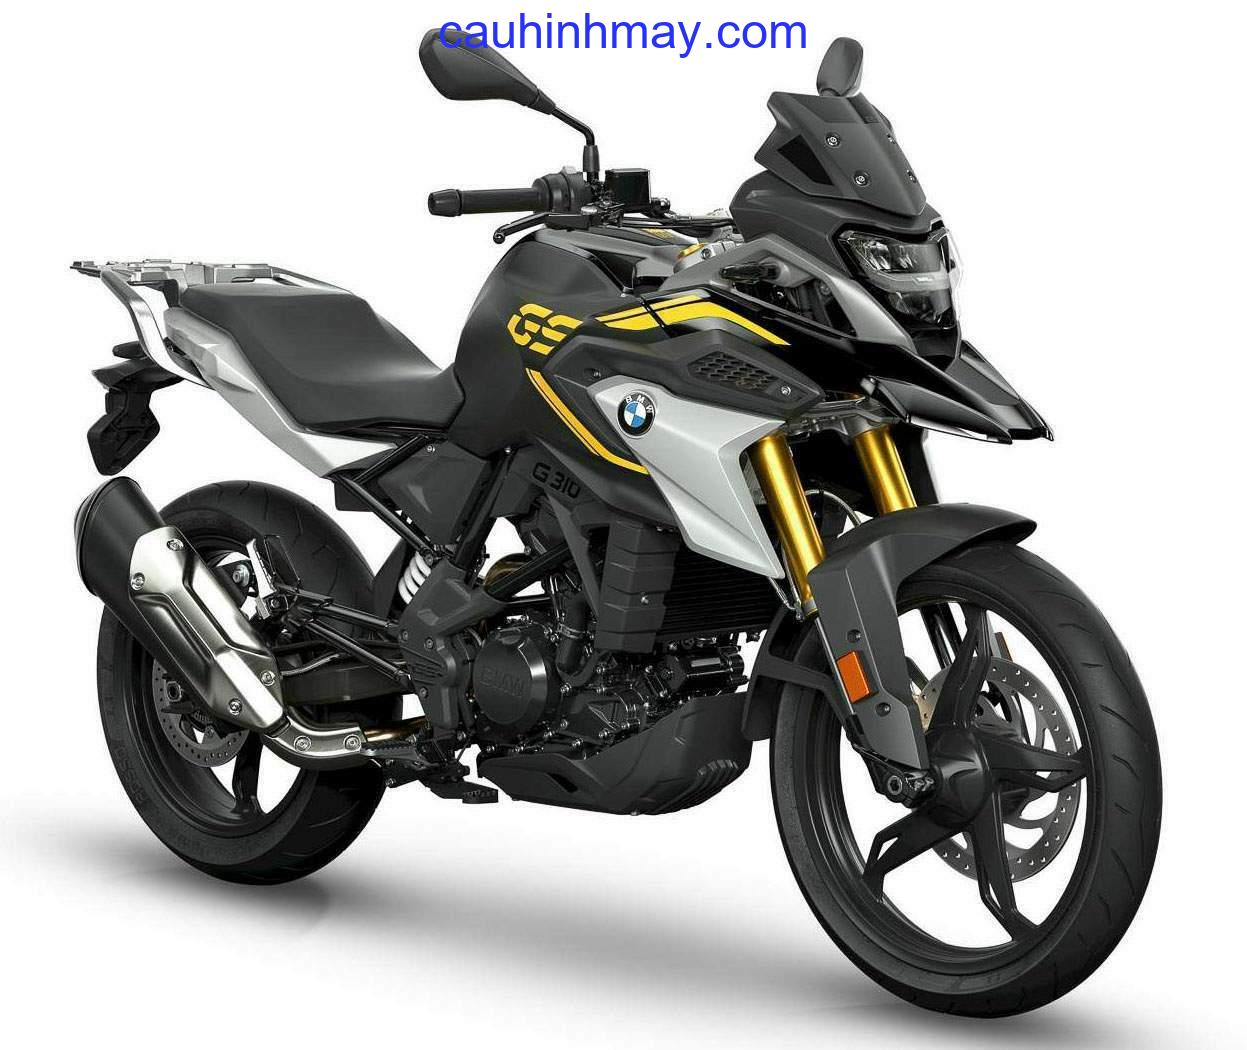 BMW G 310GS 40 YEARS EDITION - cauhinhmay.com